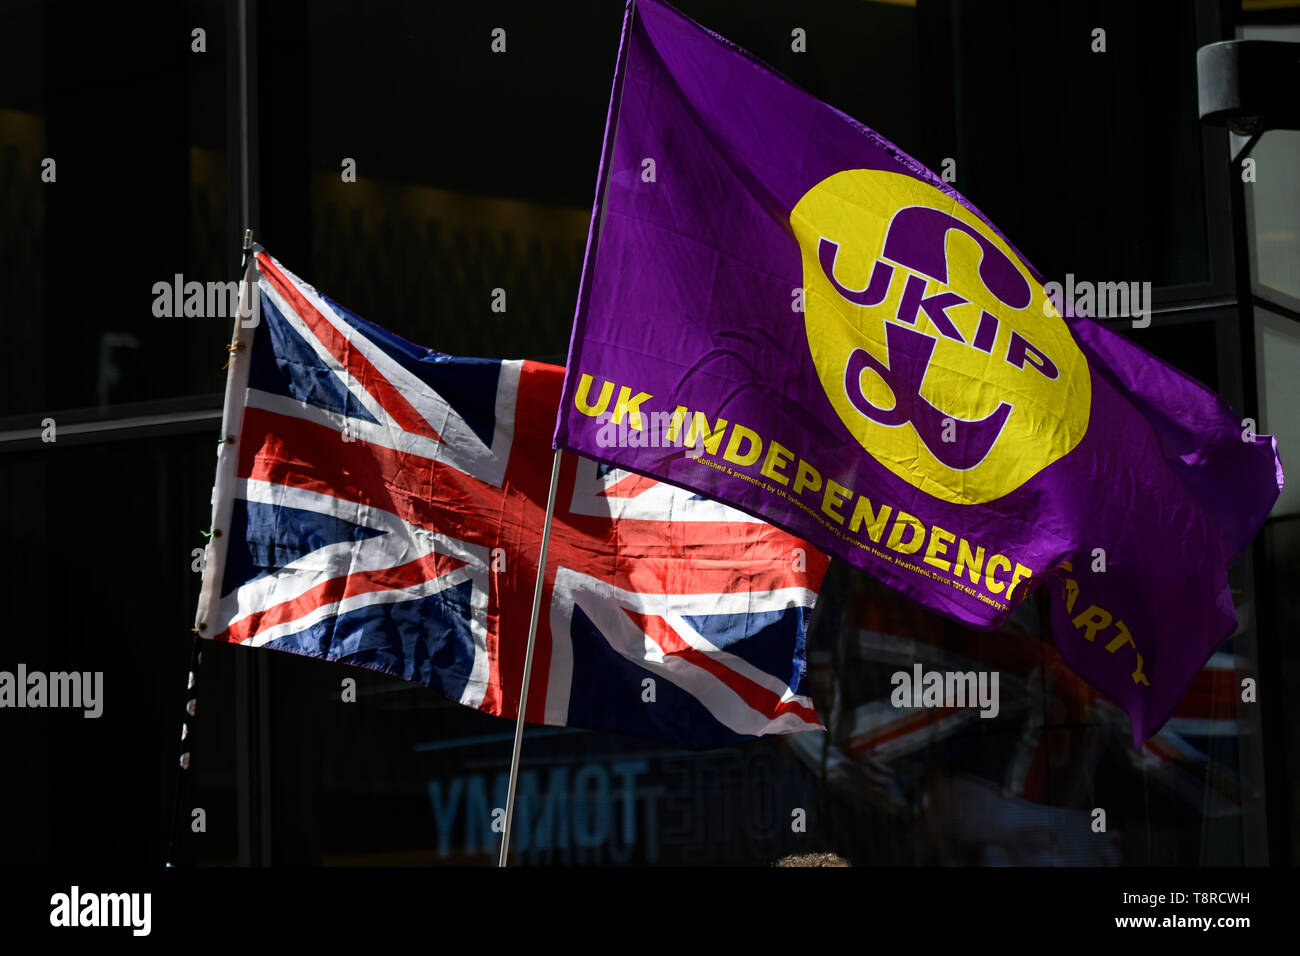 A British flag and United Kingdom Independence Party (UKIP) flag are seen outside the Old Bailey during the hearing. The right-wing leader Tommy Robinson, whose real name is Stephen Yaxley-Lennon, attended The High Court for latest contempt hearing. Pro Tommy Robinson demonstrators gathered outside the Old Bailey, while Yaxley-Lennon, aka Robinson spoke. Stock Photo